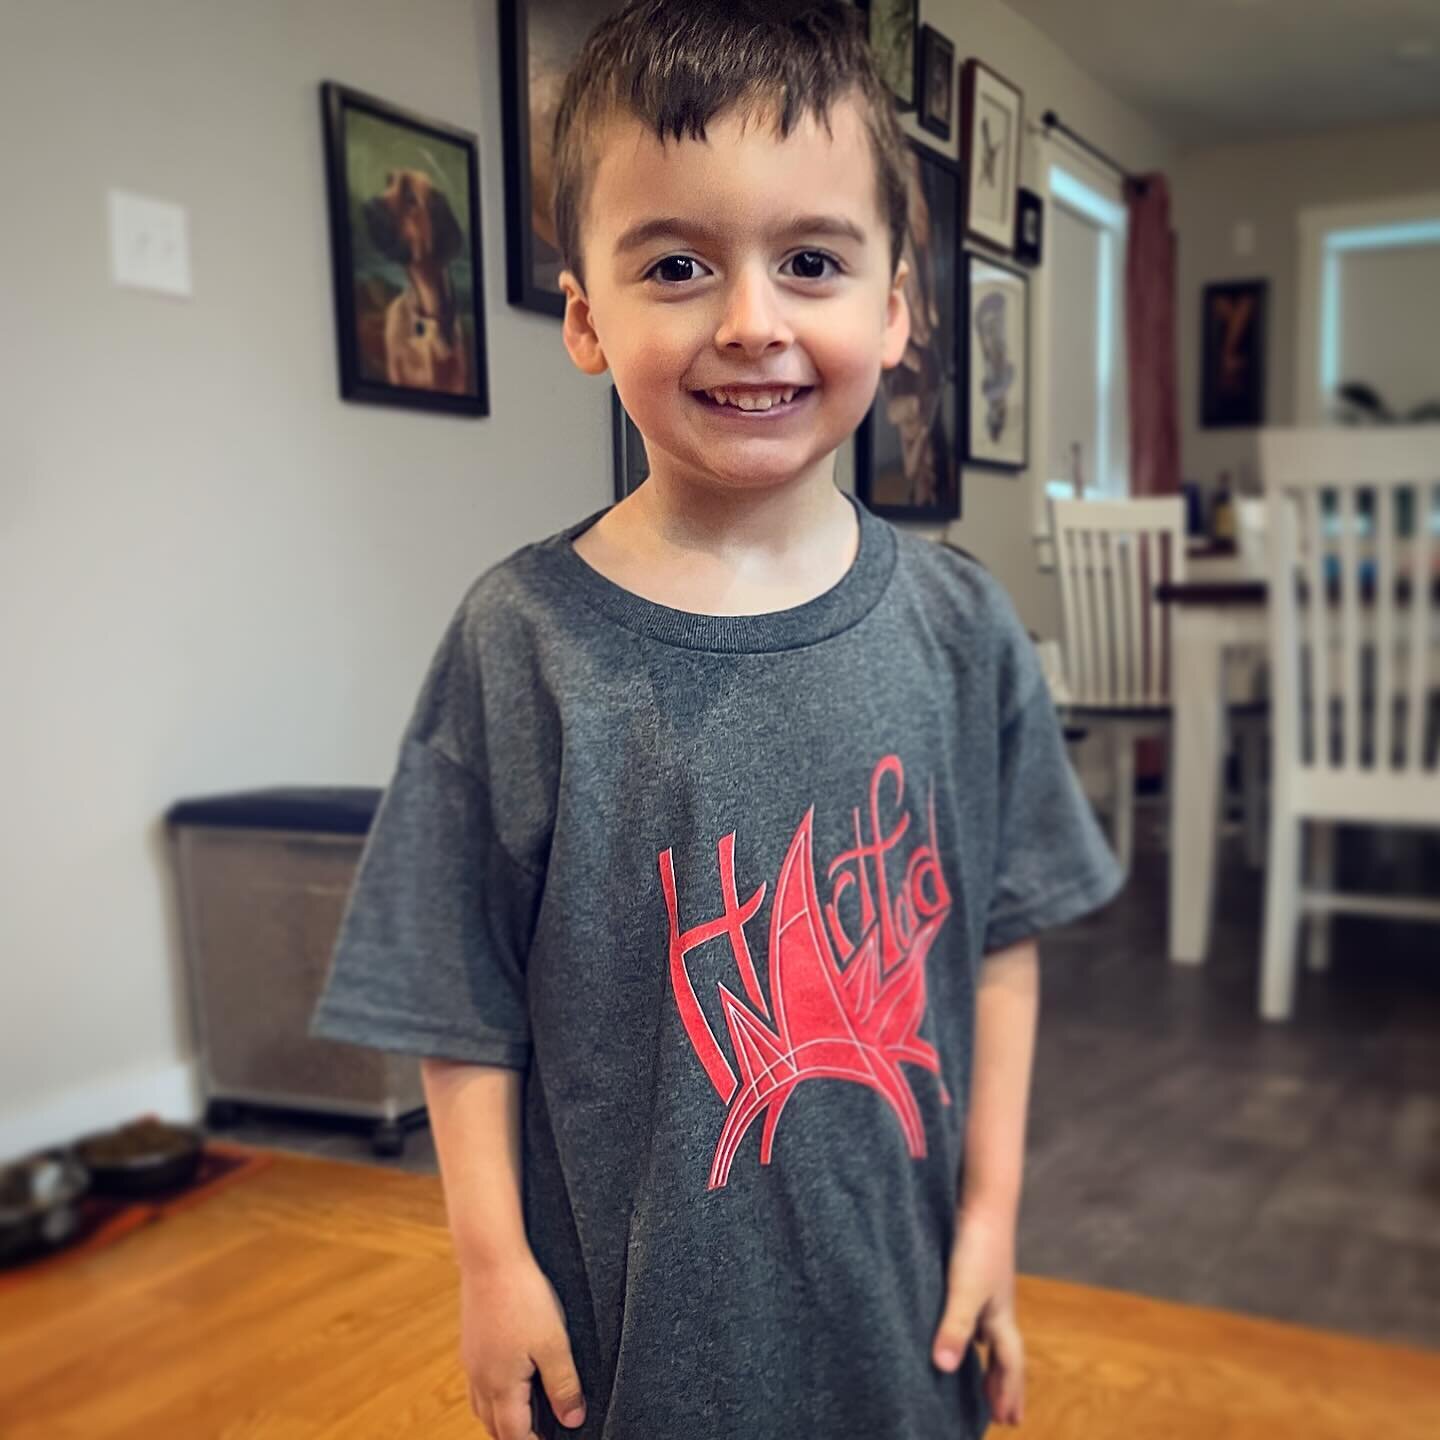 Sawyer is excited to tell you that the new Hartford Stego shirt is now available!  If you are local to CT you will already know that this was inspired by the iconic sculpture in downtown Hartford by Alexander Calder. 
.
There are shirts for kids AND 